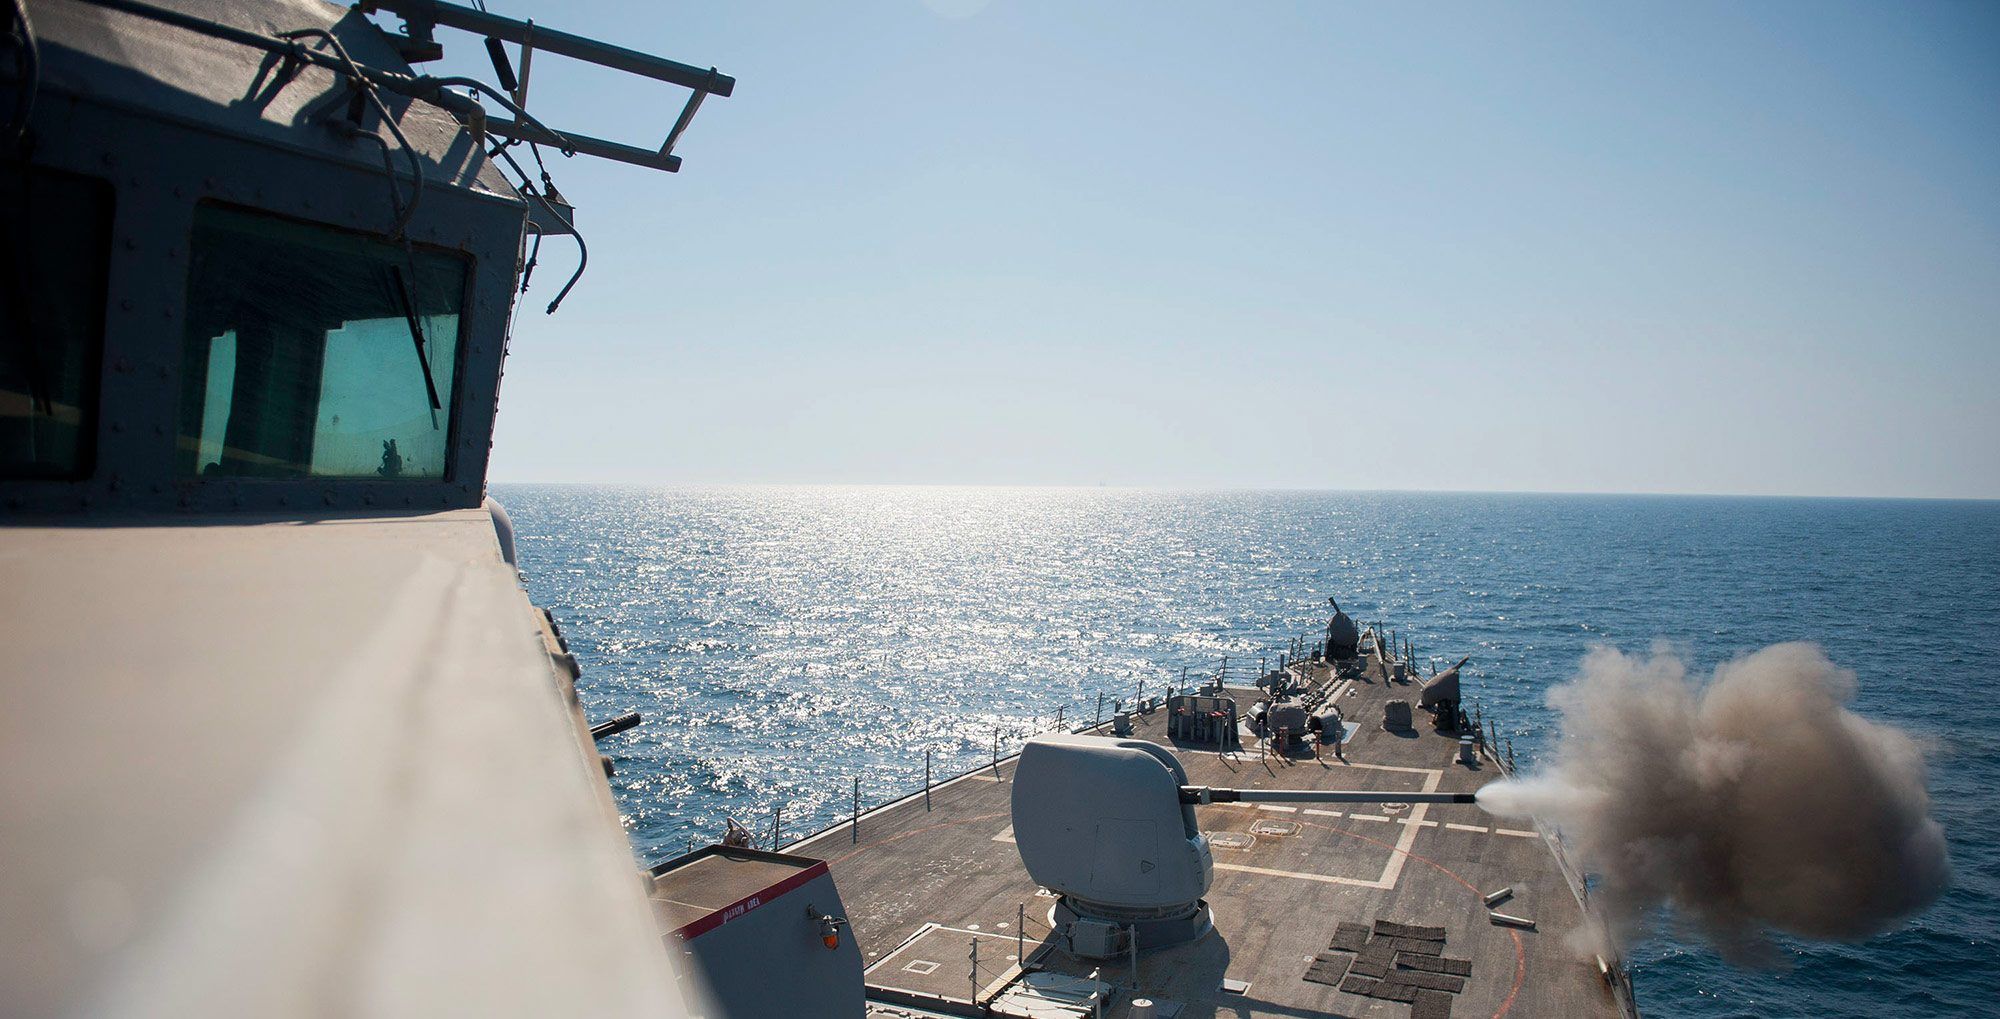 guided missile destroyer at sea firing gun